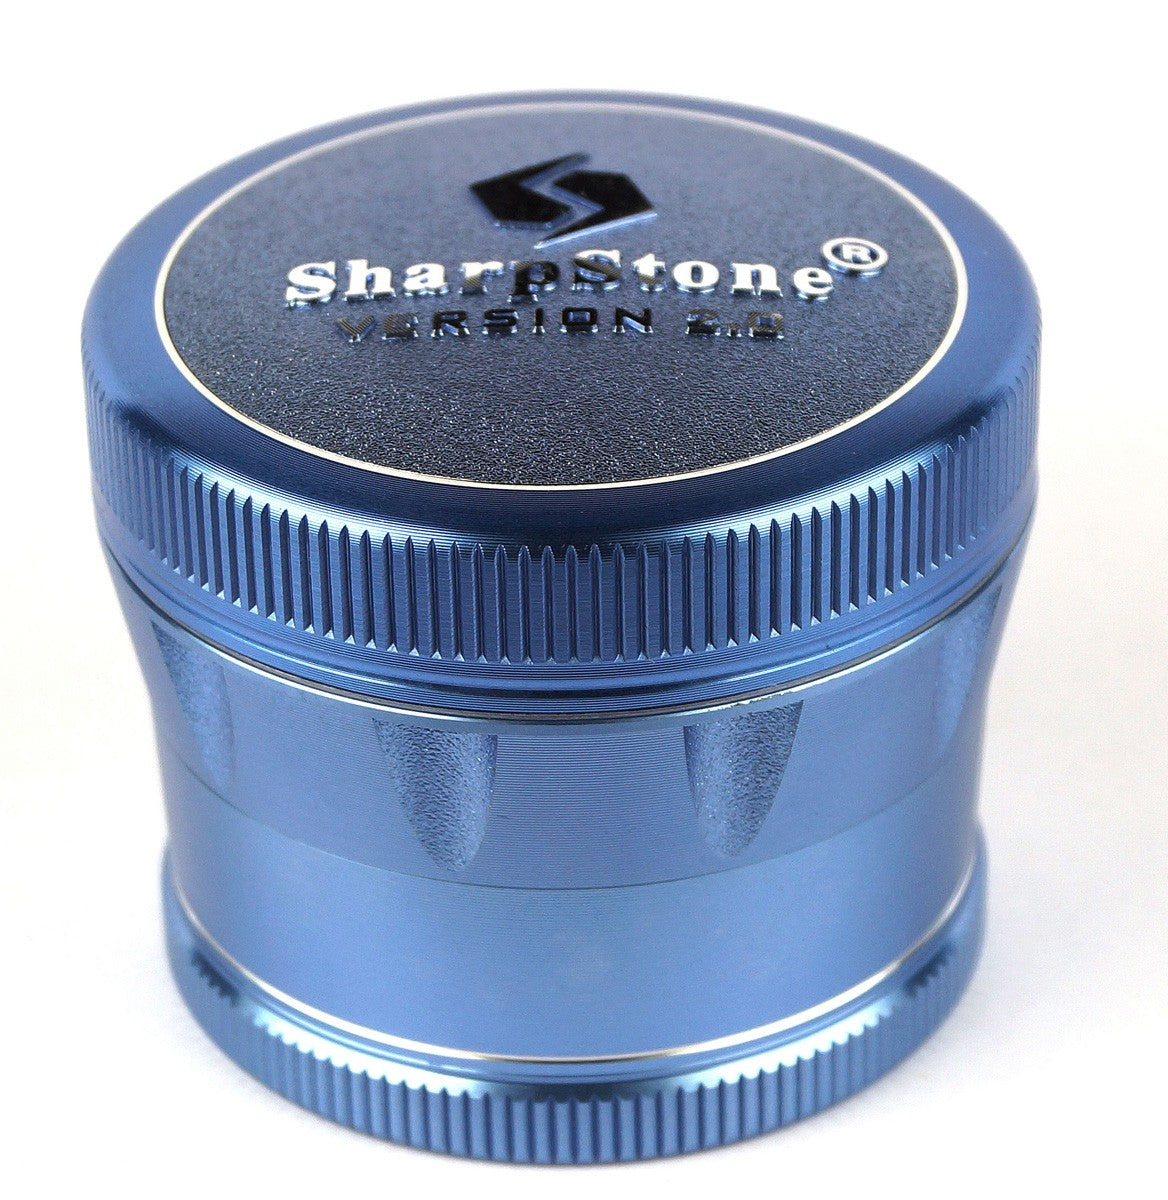 Welcome to the new SharpStone Grinder! At Kana Accessories 